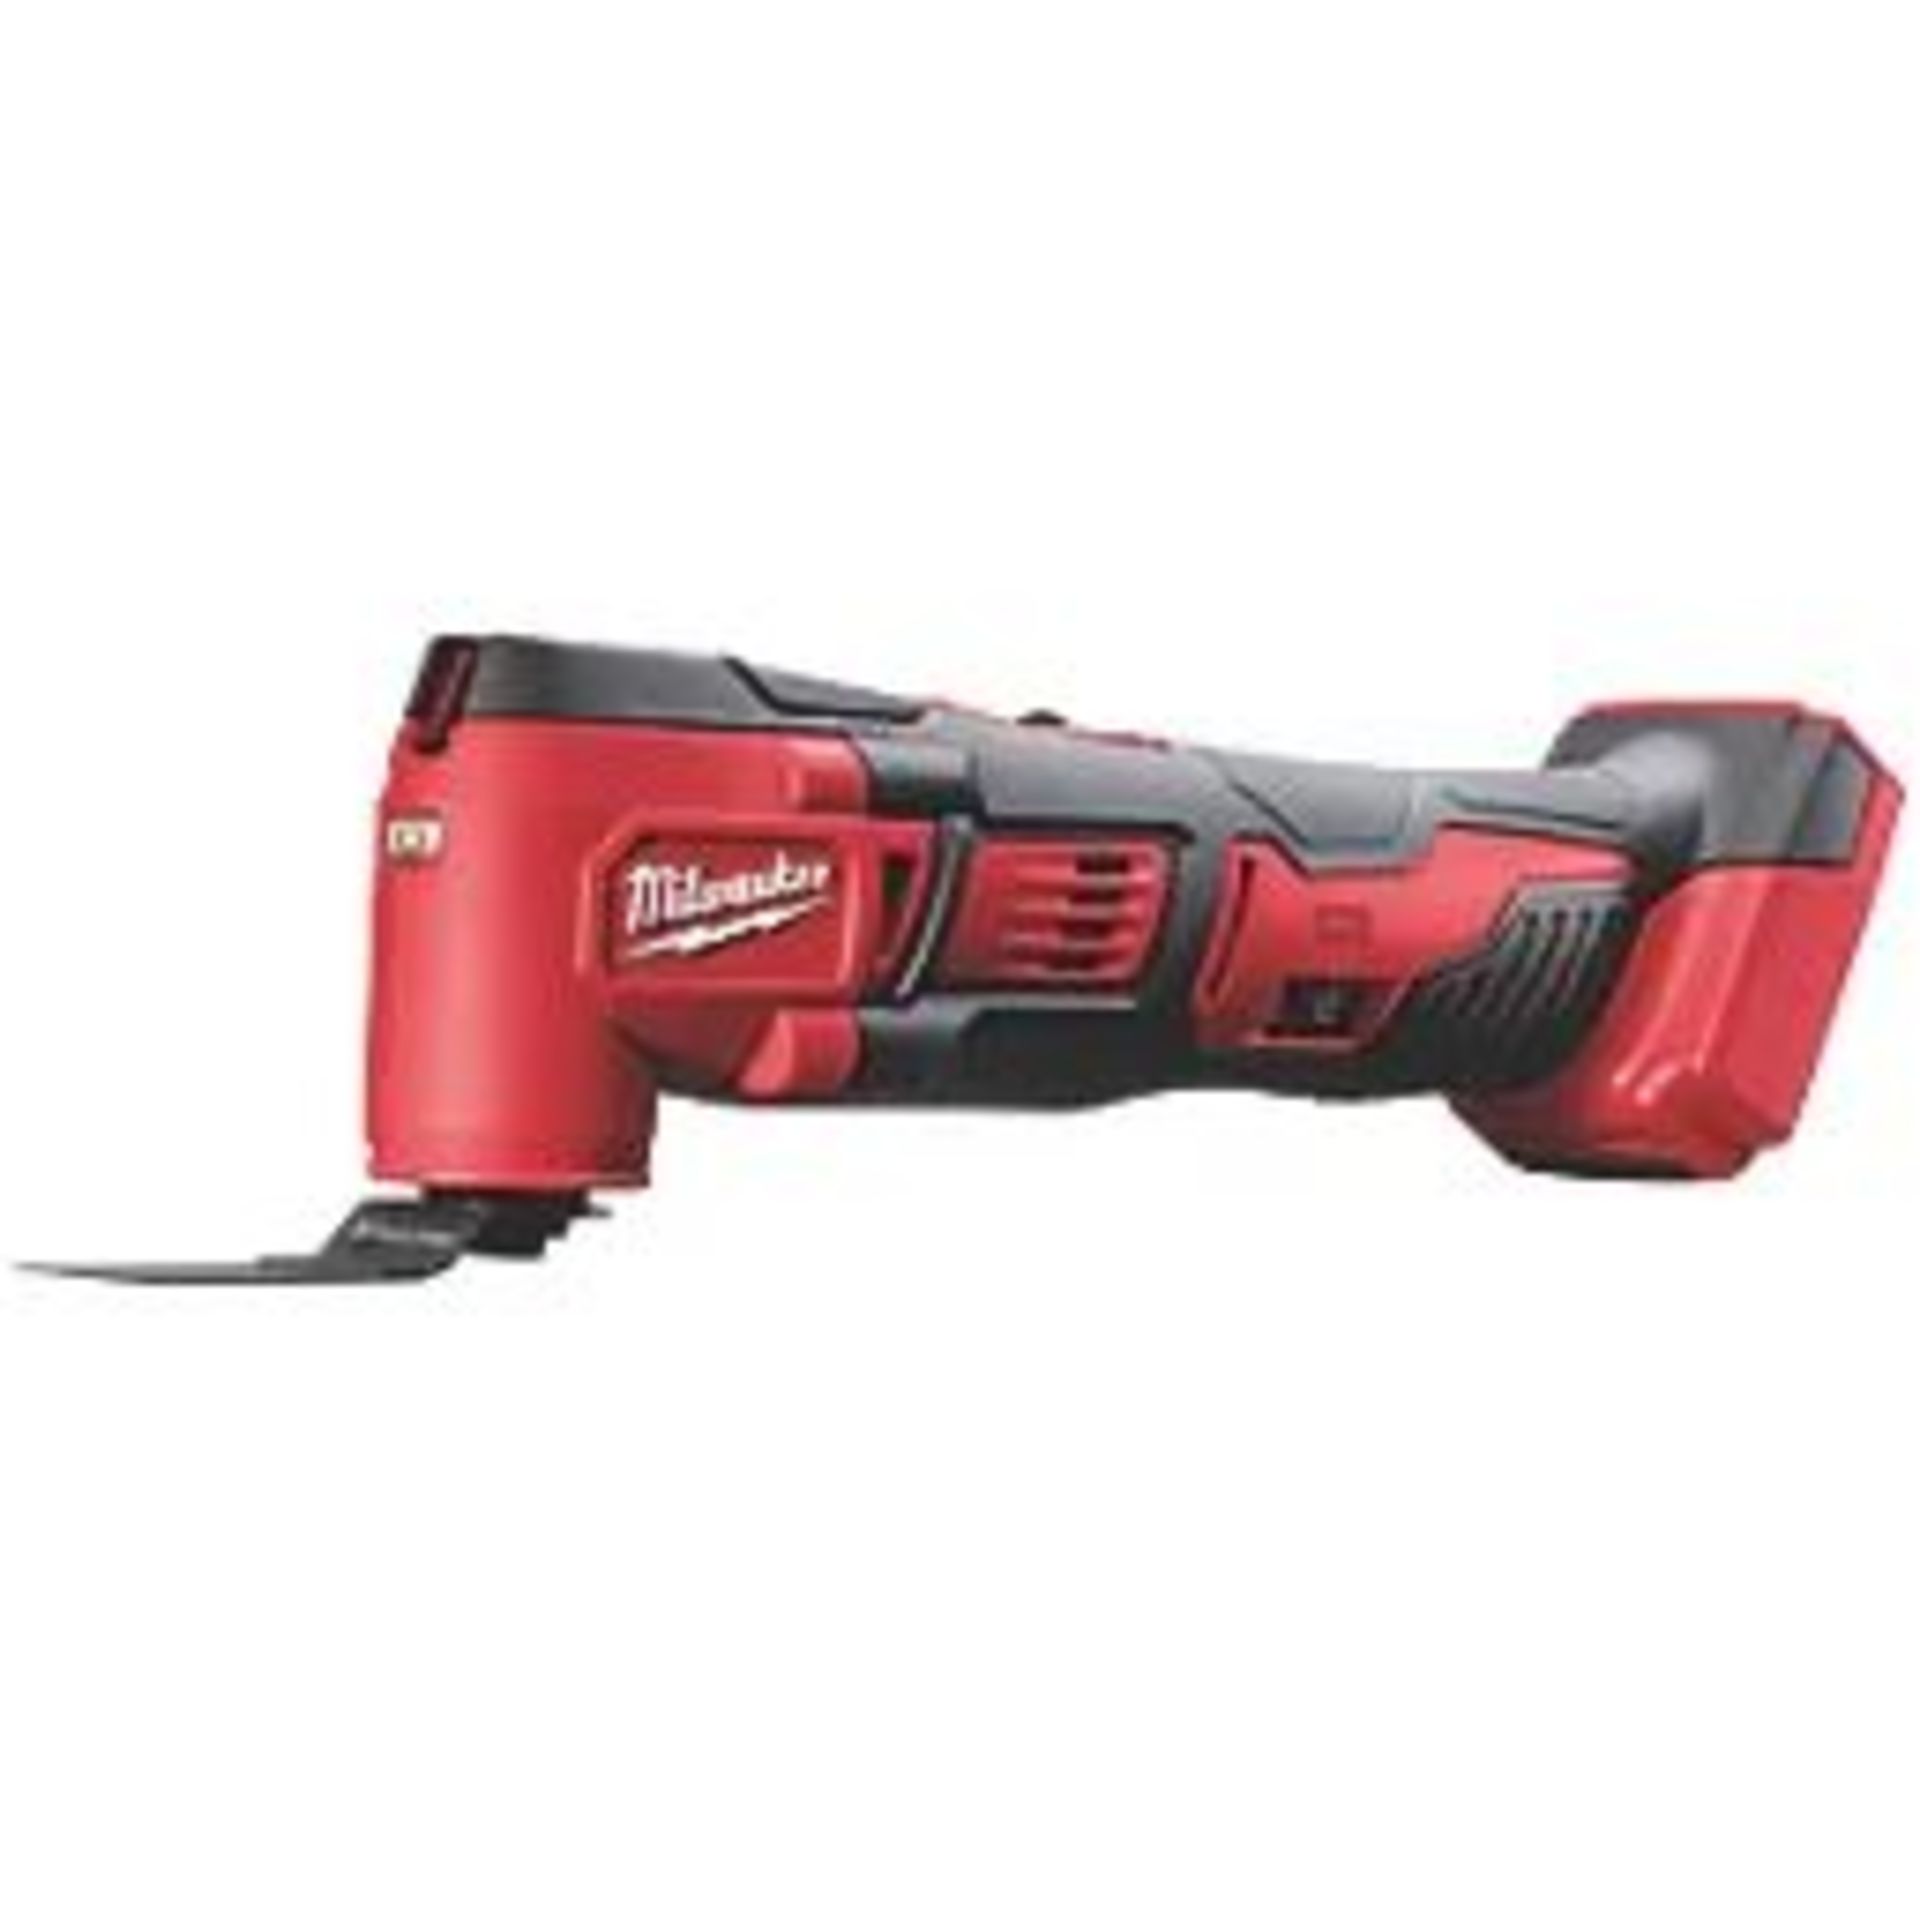 MILWAUKEE M18 BMT-0 18V LI-ION CORDLESS MULTI-TOOL. - R13a.11. Suitable for metal, wood and plastic.